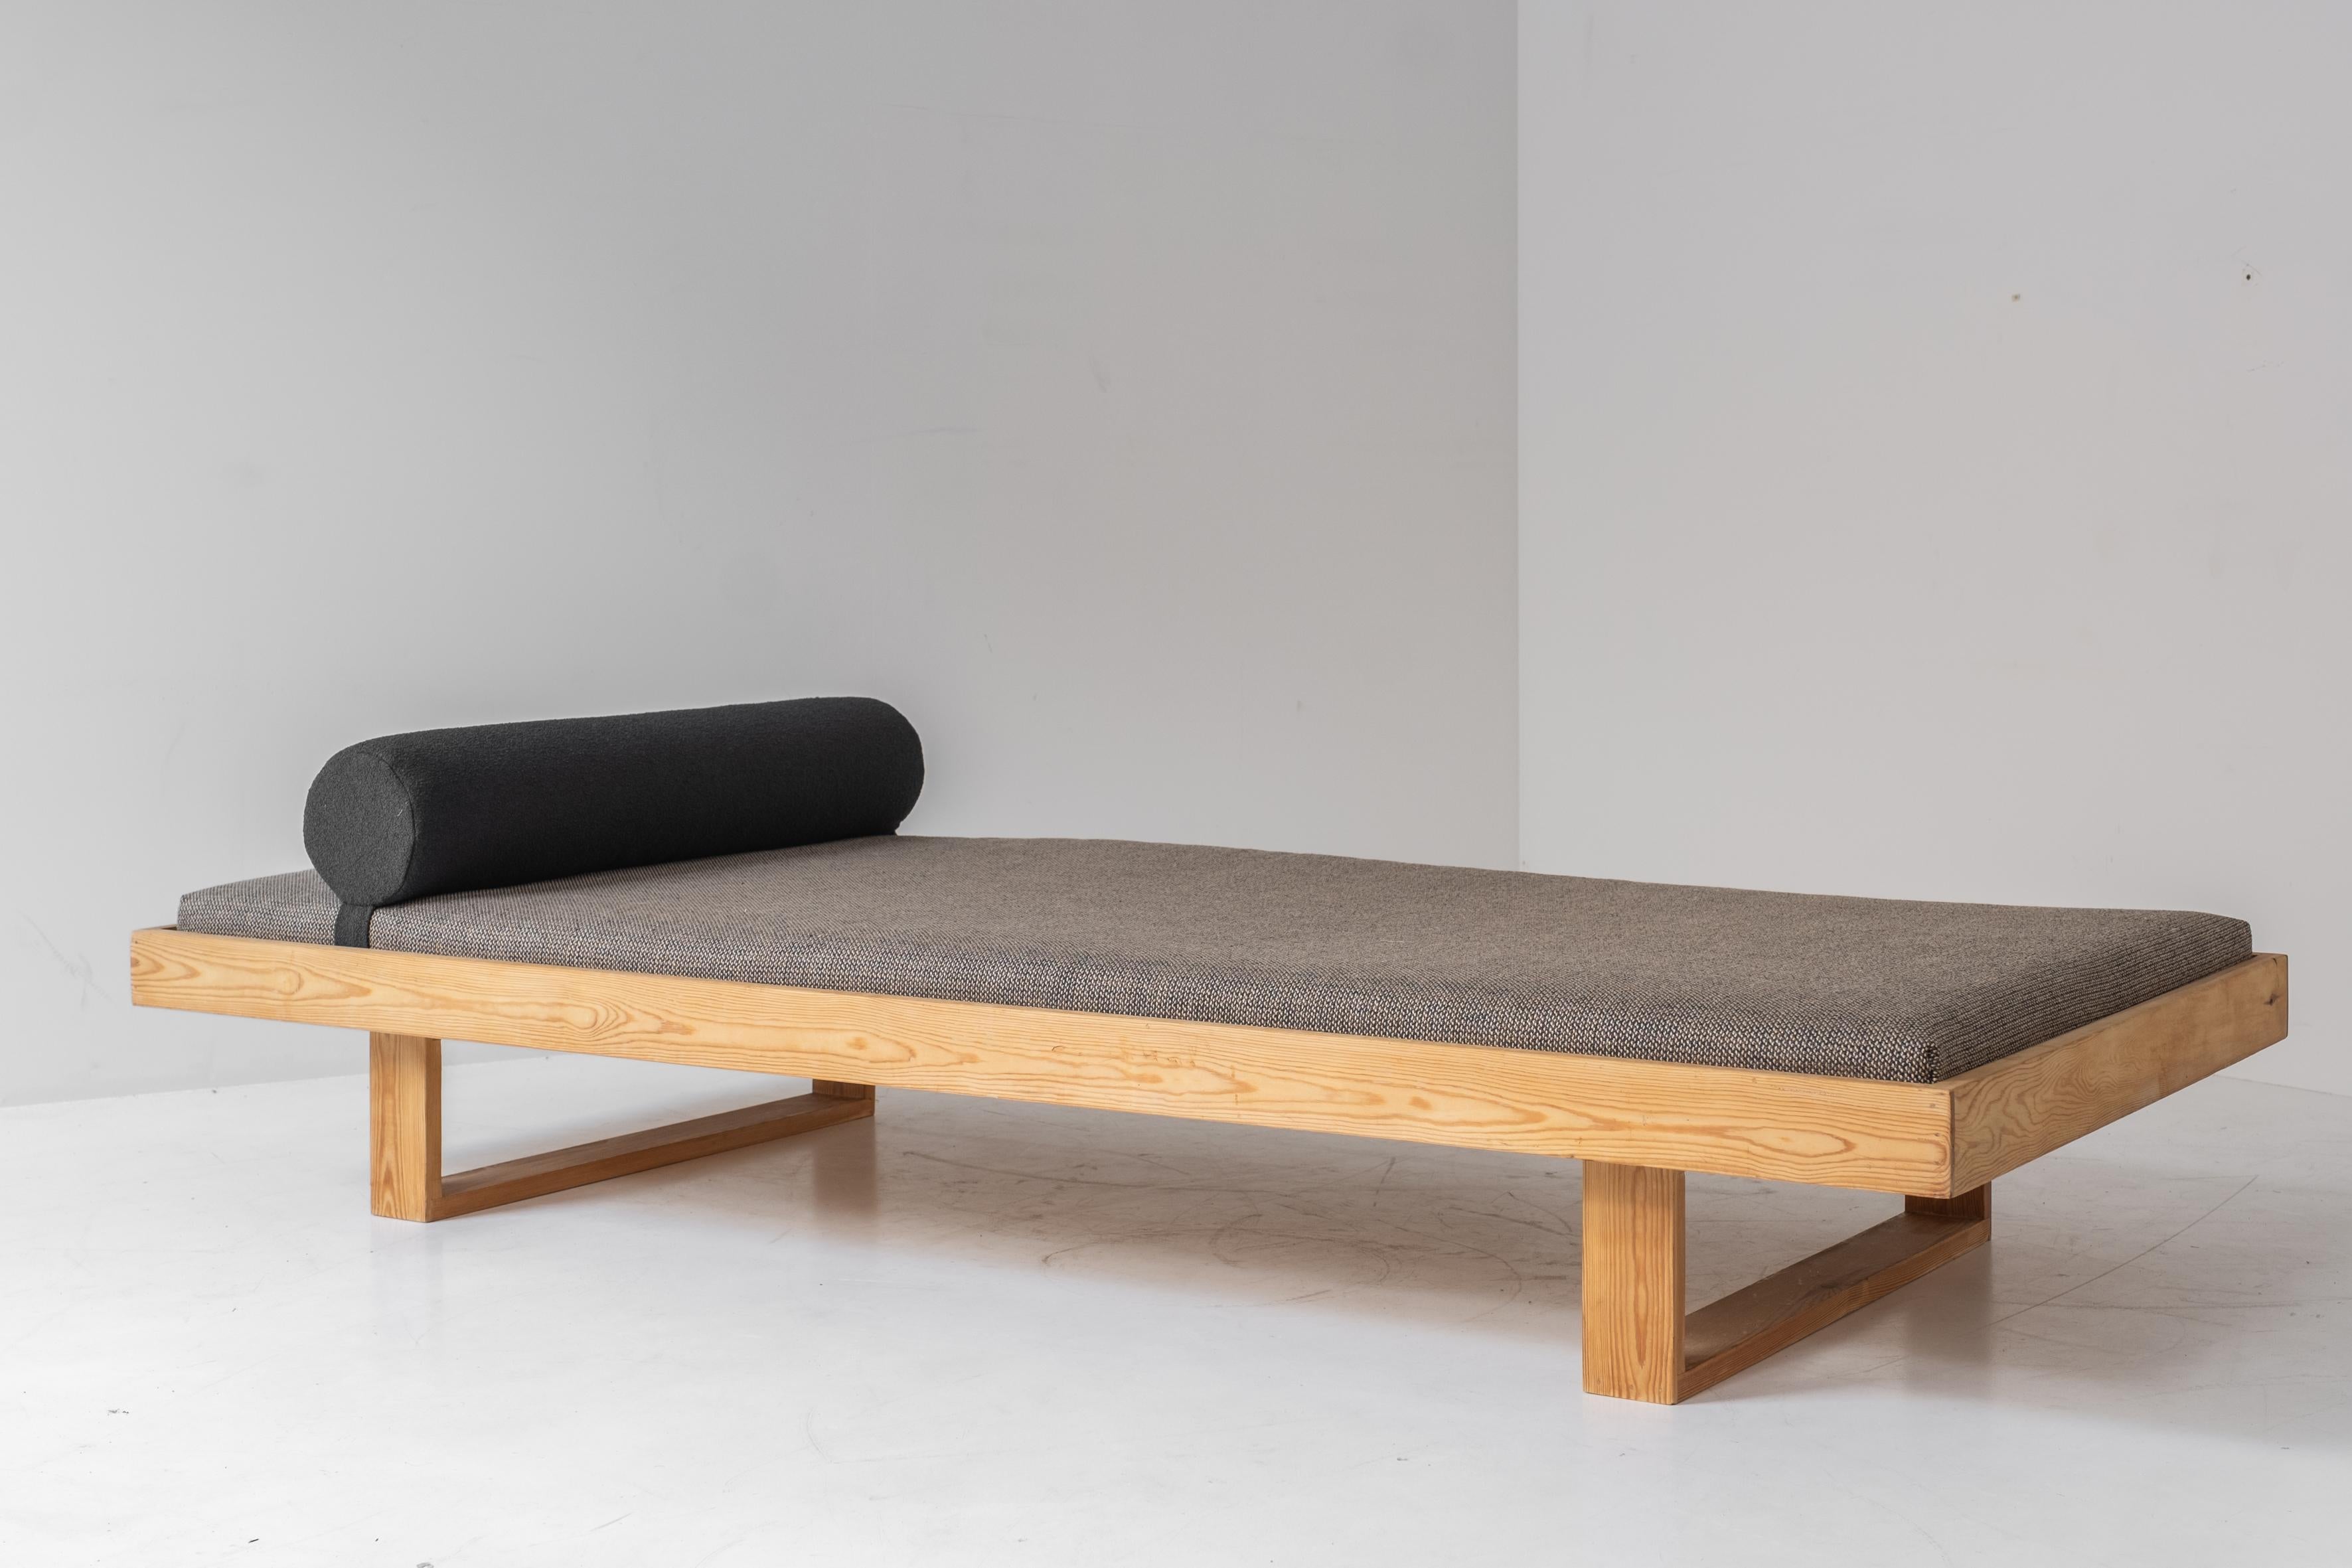 Scandinavian Modern Daybed in pine from Denmark, dating from the 1960s.